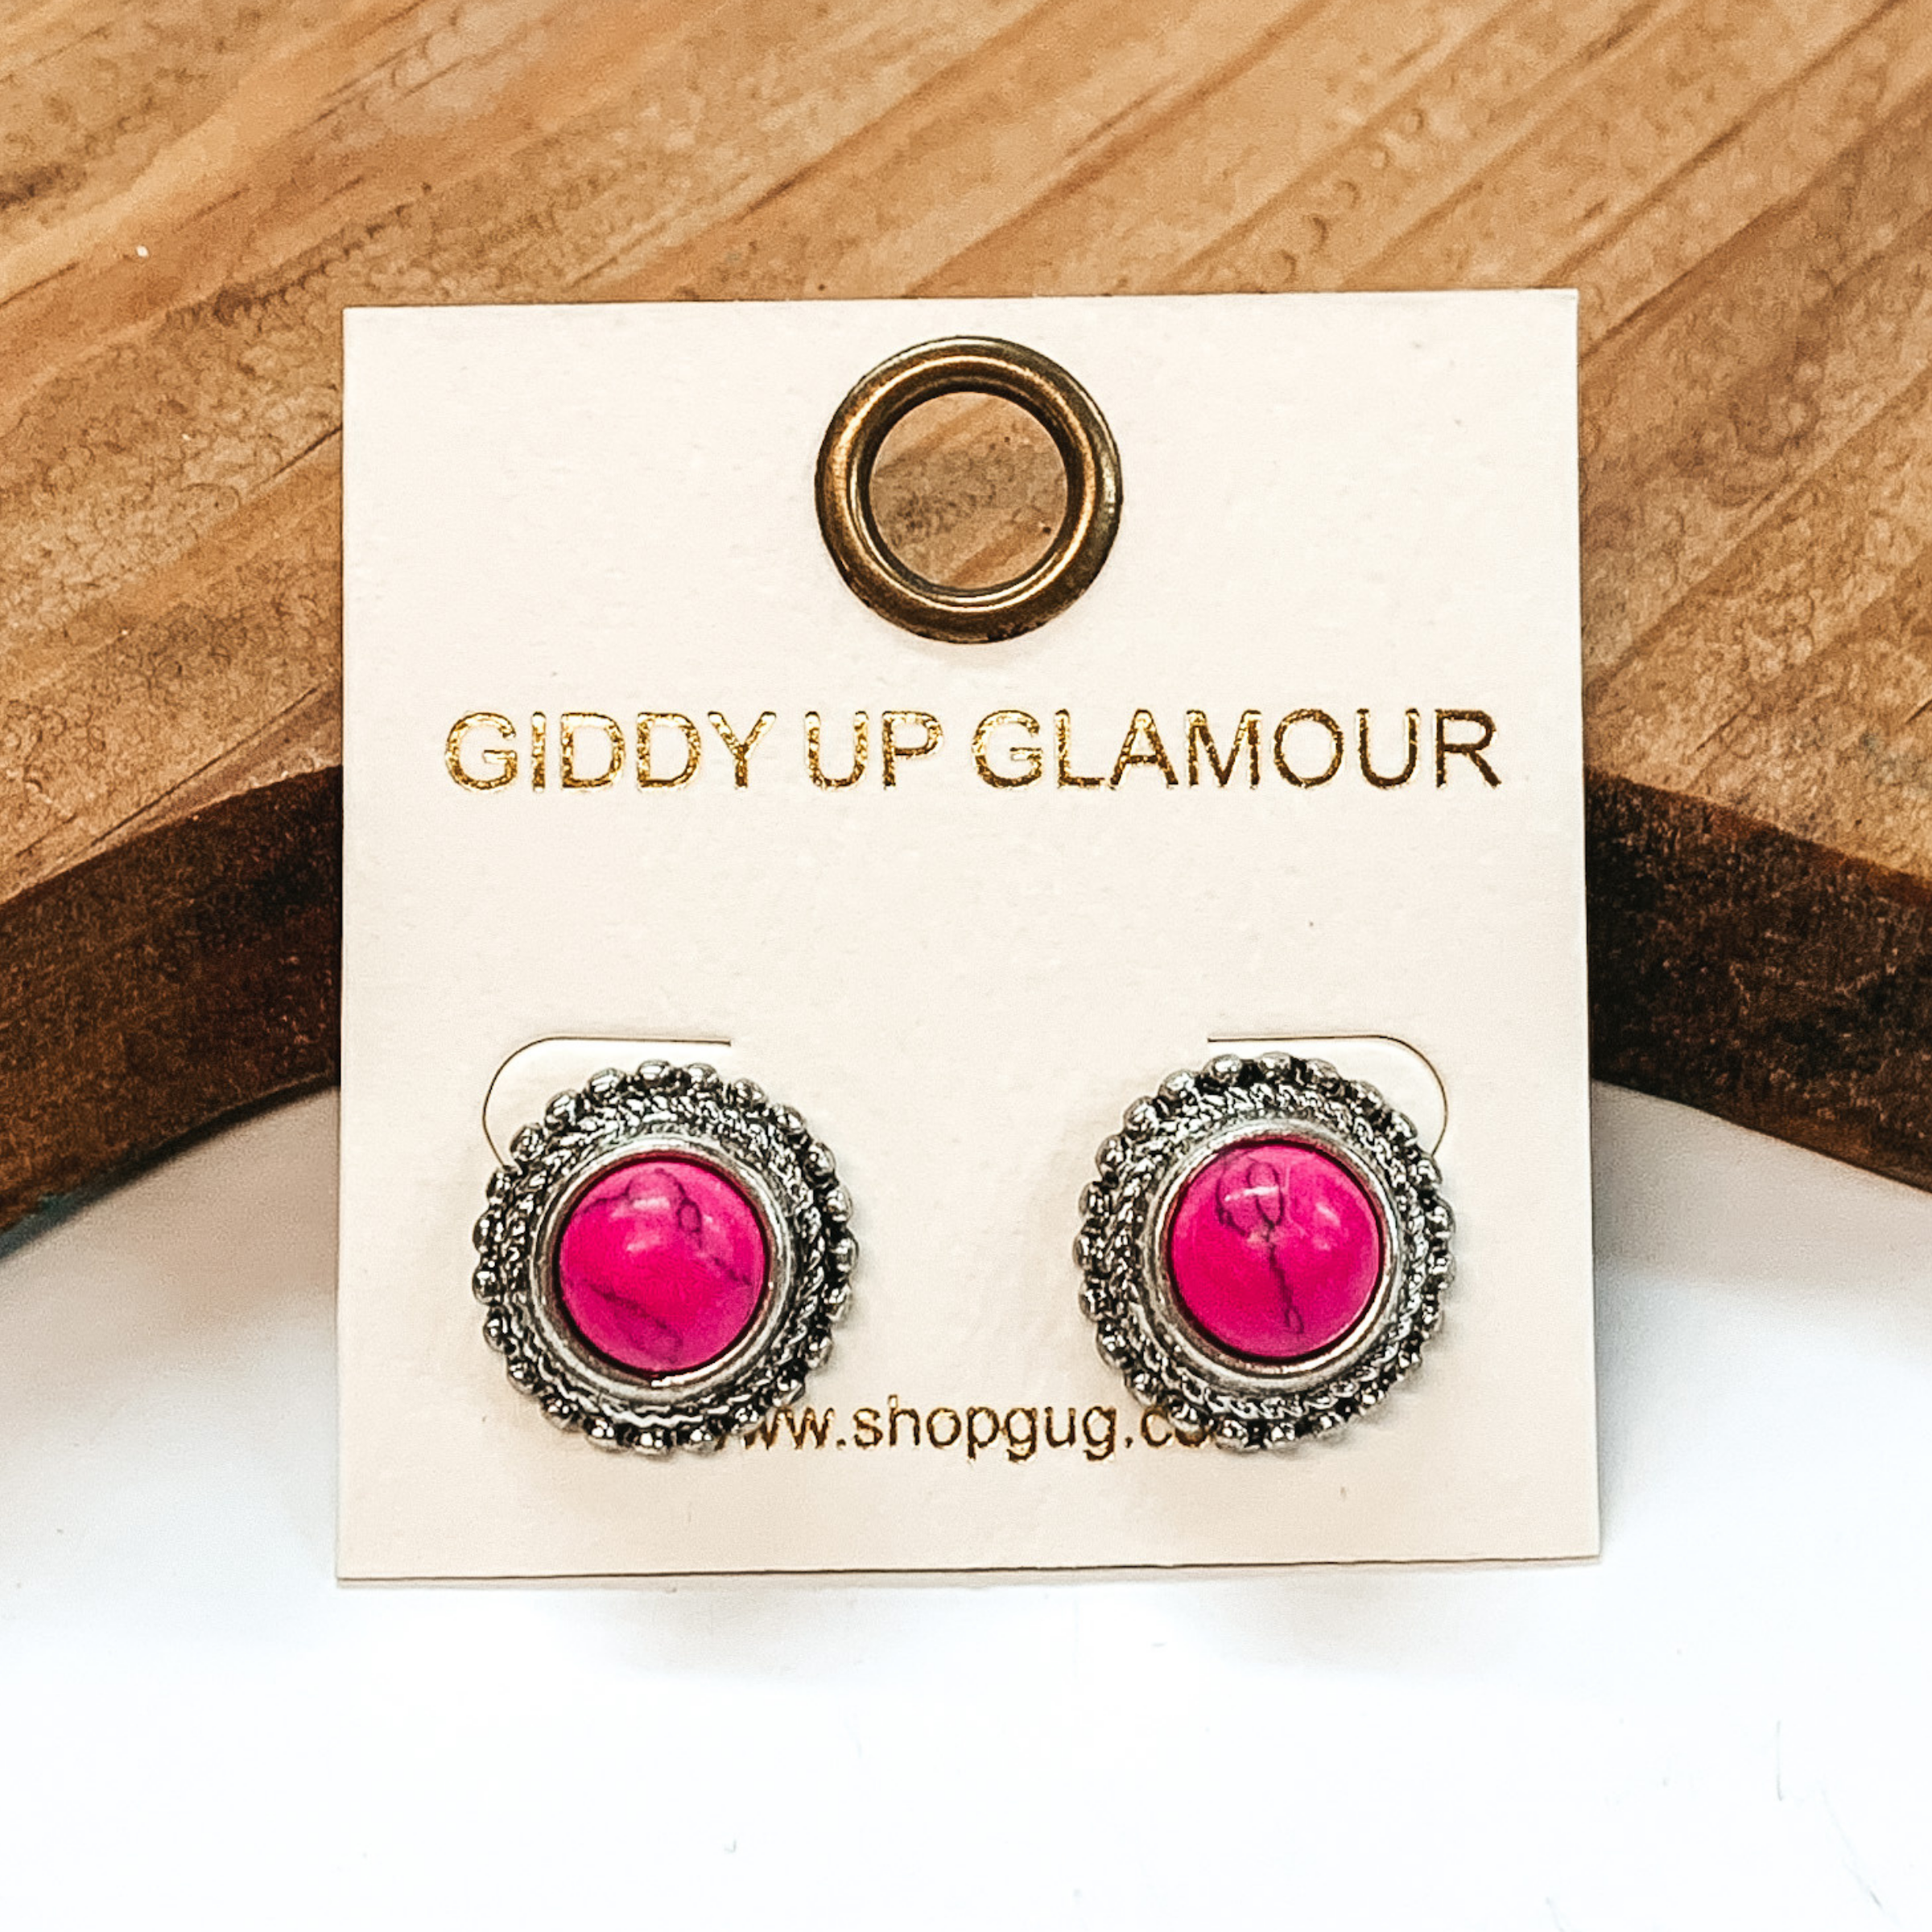 Studded earrings with silver outline with a pink stone in the middle. These earrings are pictured on a white background with a brown block in the back.